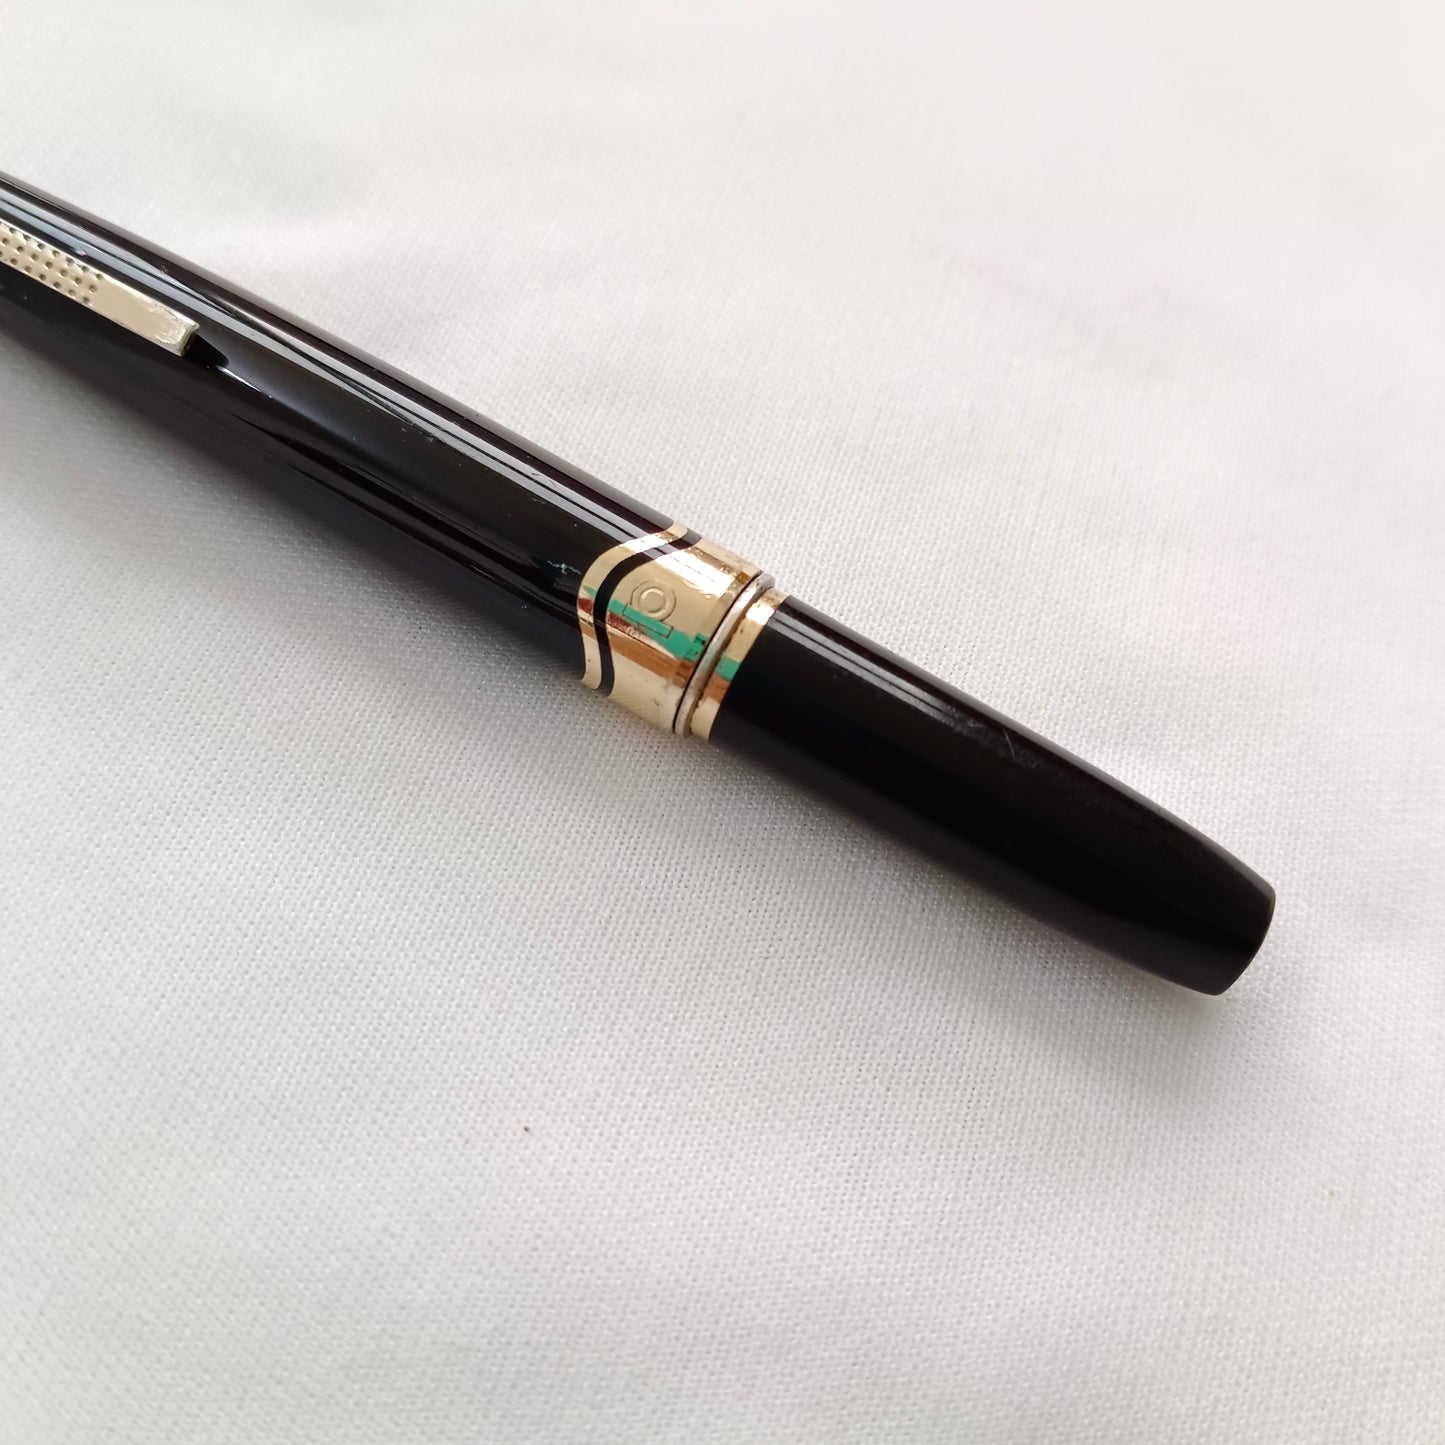 Platinum pocket Black fountain pen with 14Kt gold nib made in japan